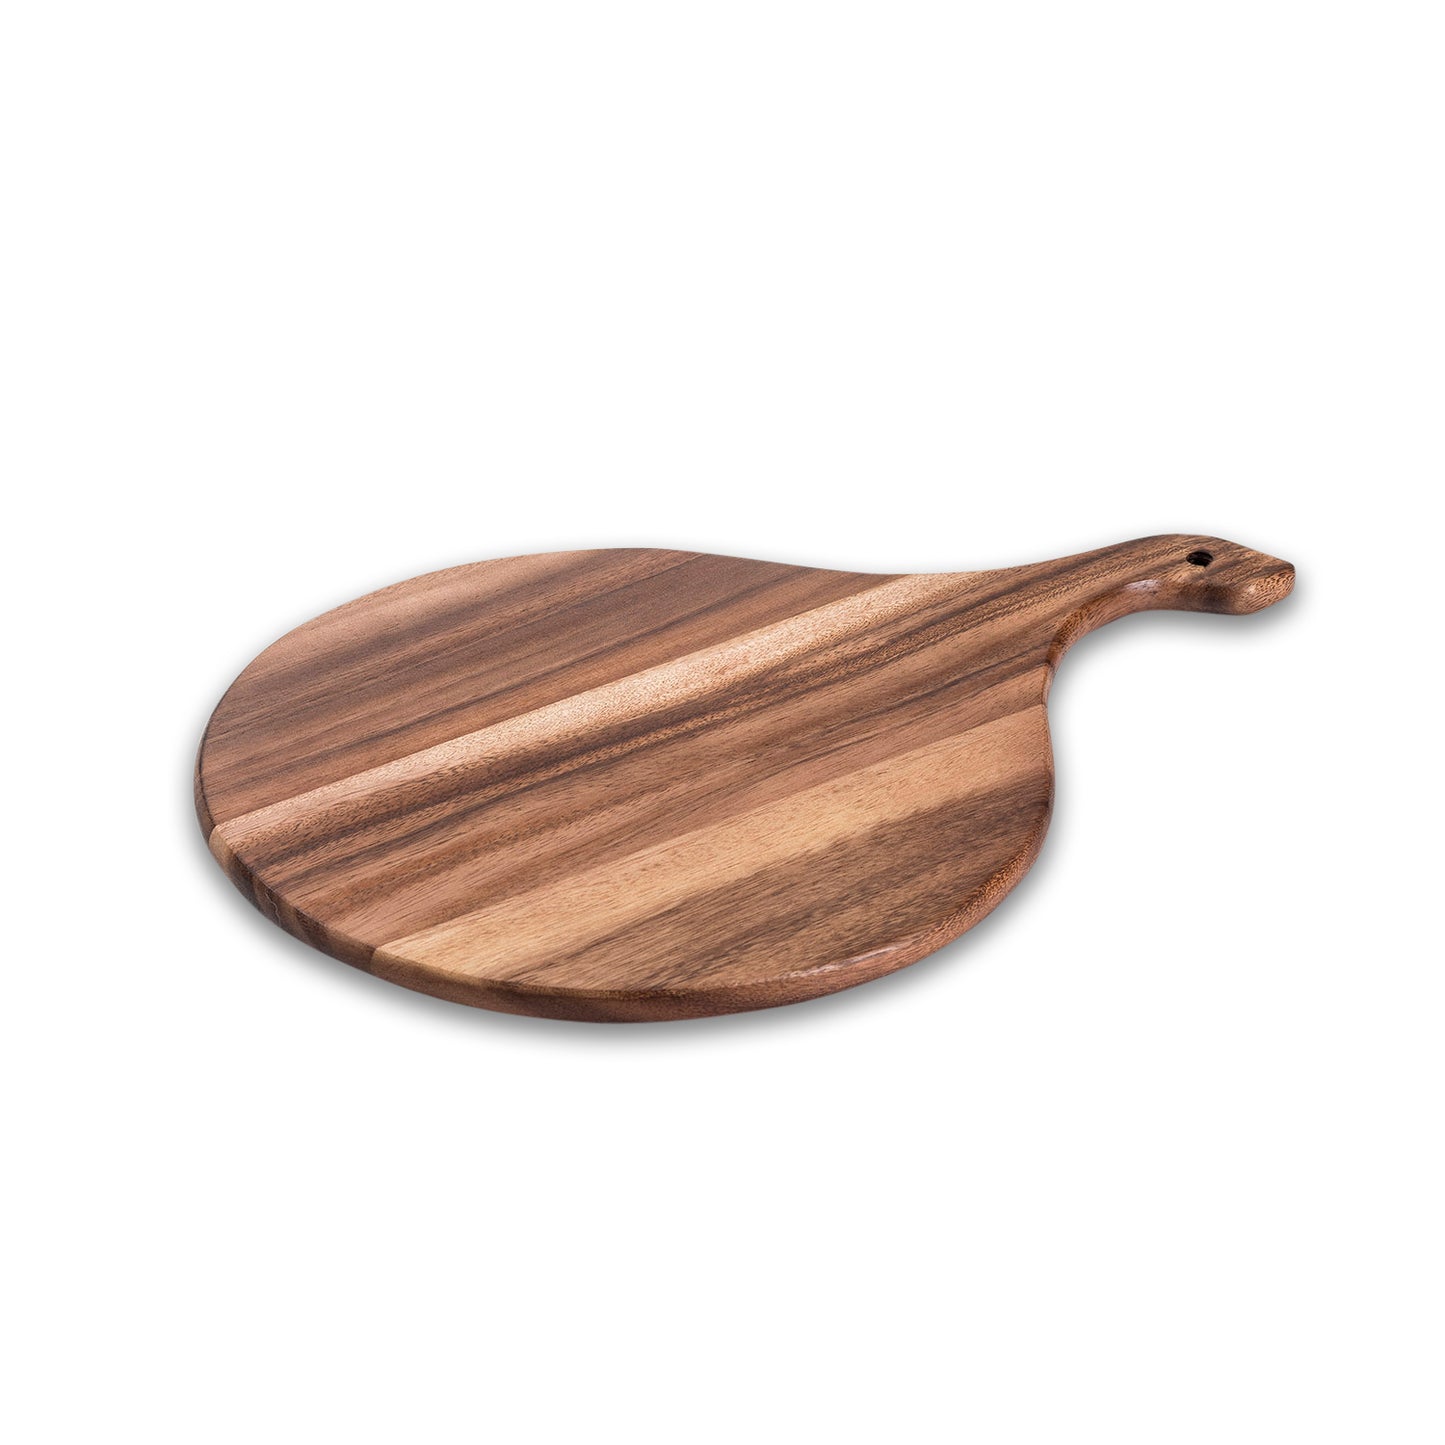 Acacia Wood Cutting/ Charcuterie Board - Small Round Azure Lily